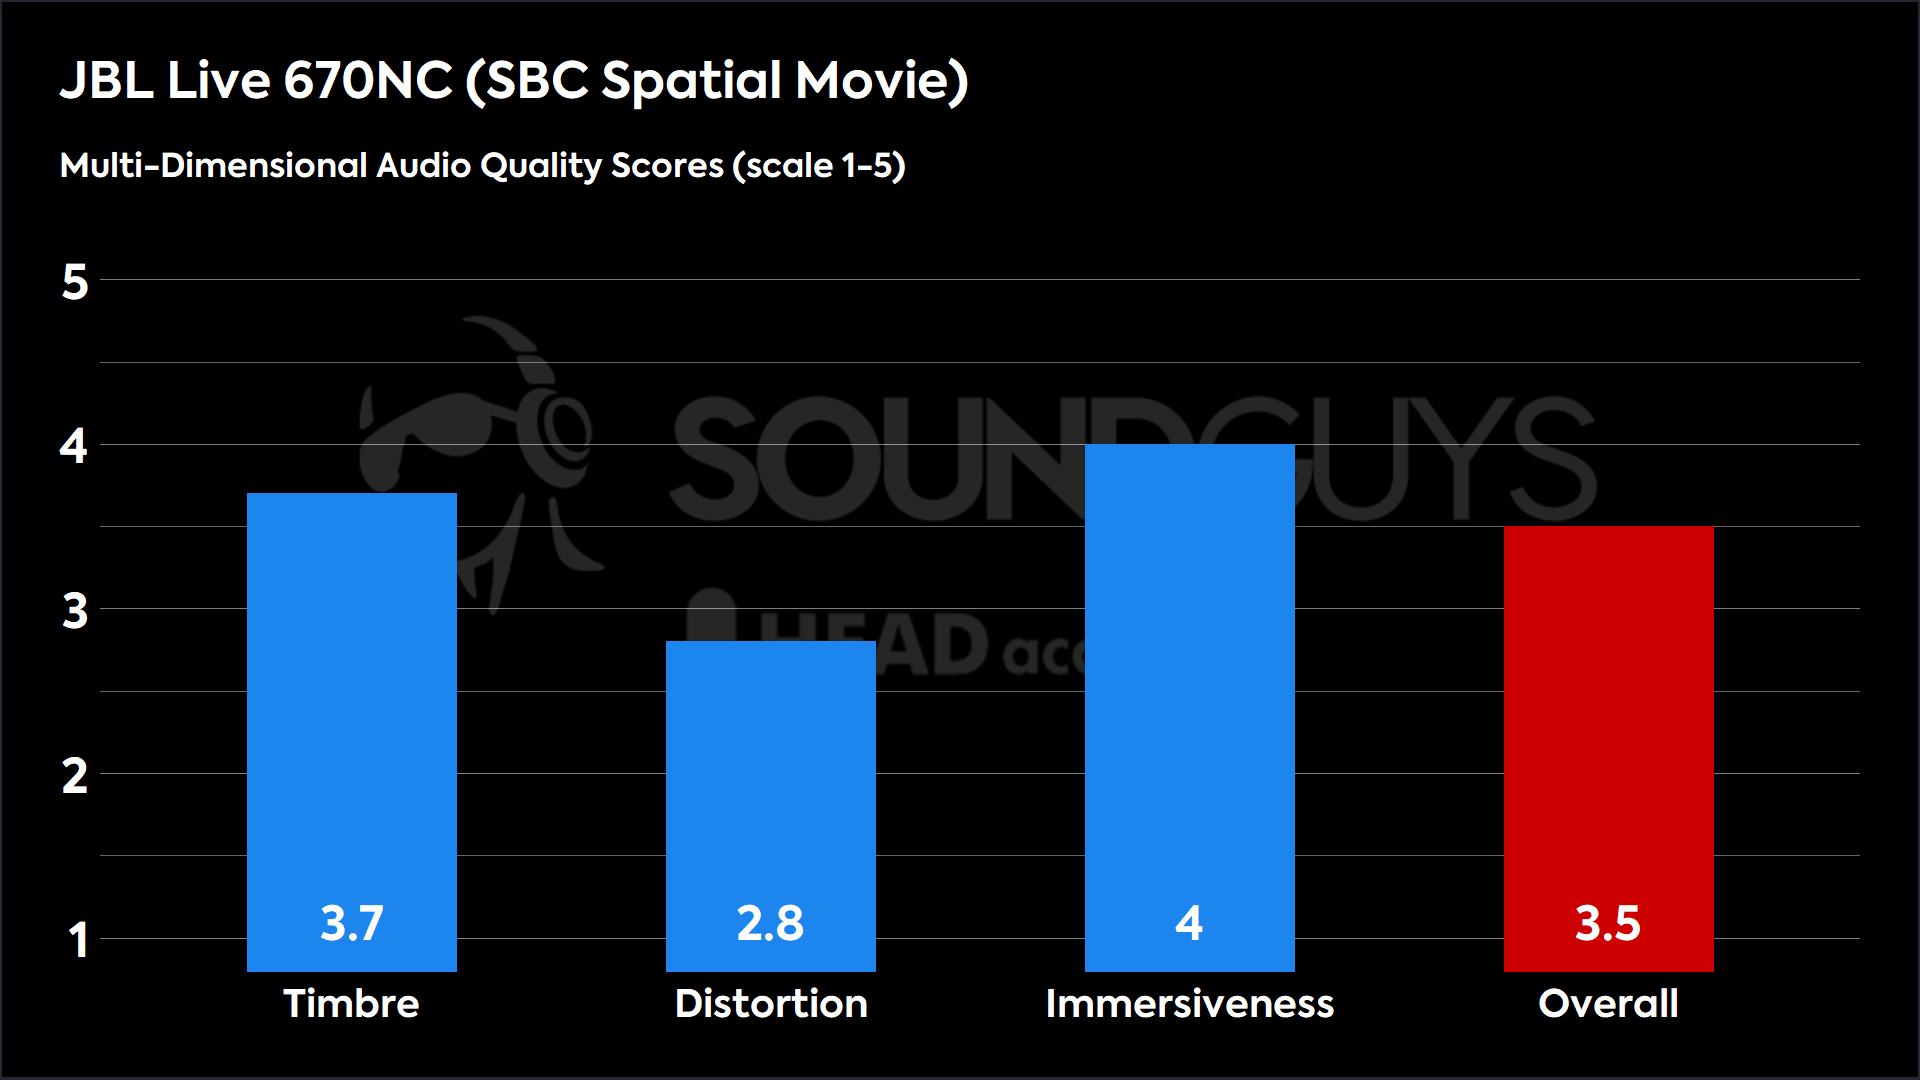 This chart shows the MDAQS results for the JBL Live 670NC in SBC Spatial Movie mode. The Timbre score is 3.7, The Distortion score is 2.8, the Immersiveness score is 4, and the Overall Score is 3.5).